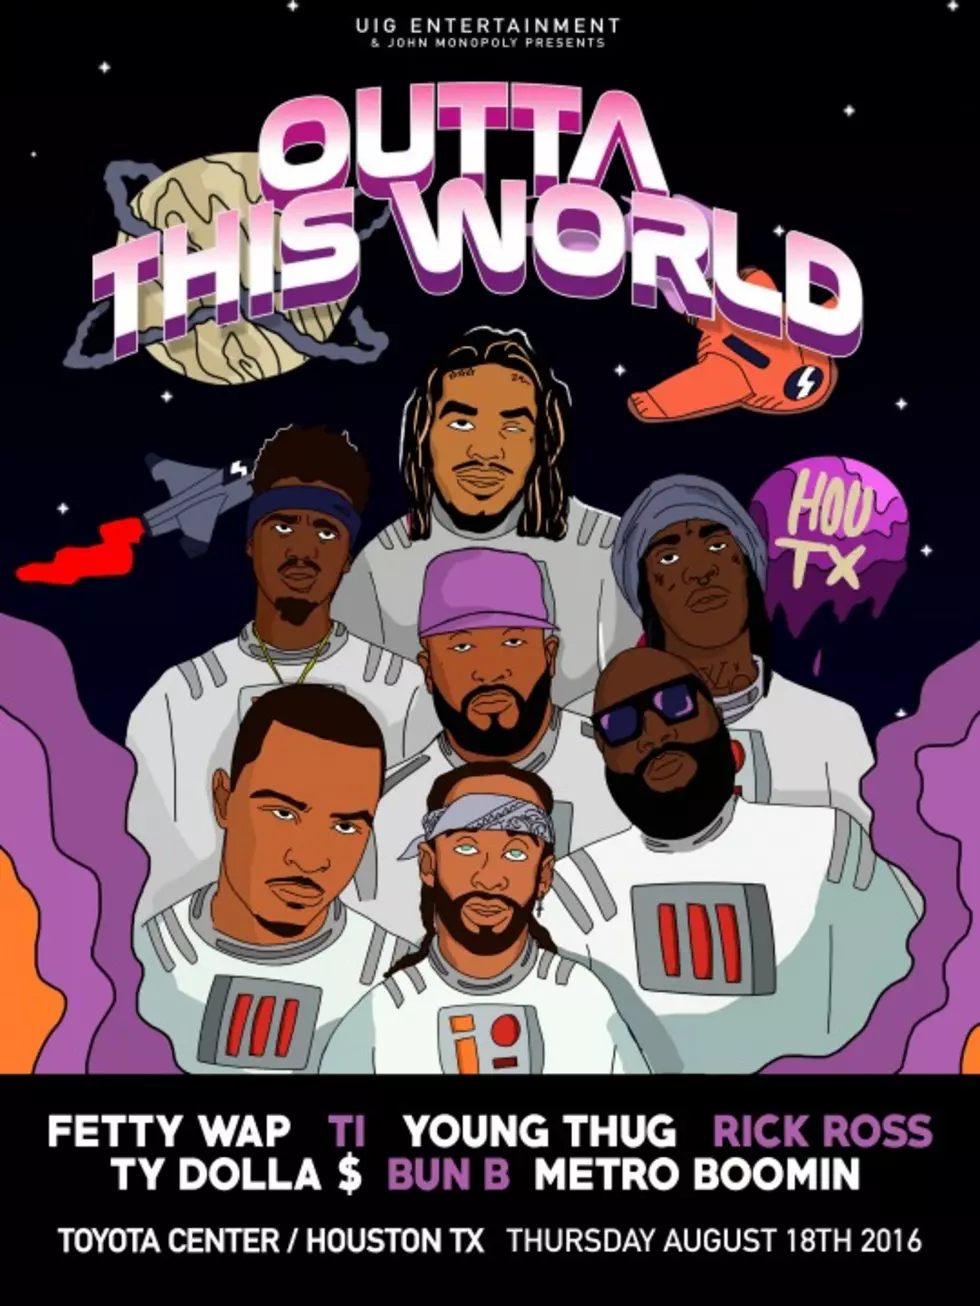 T.I., Rick Ross, Young Thug and More Will Perform at 2016 Outta This World Show